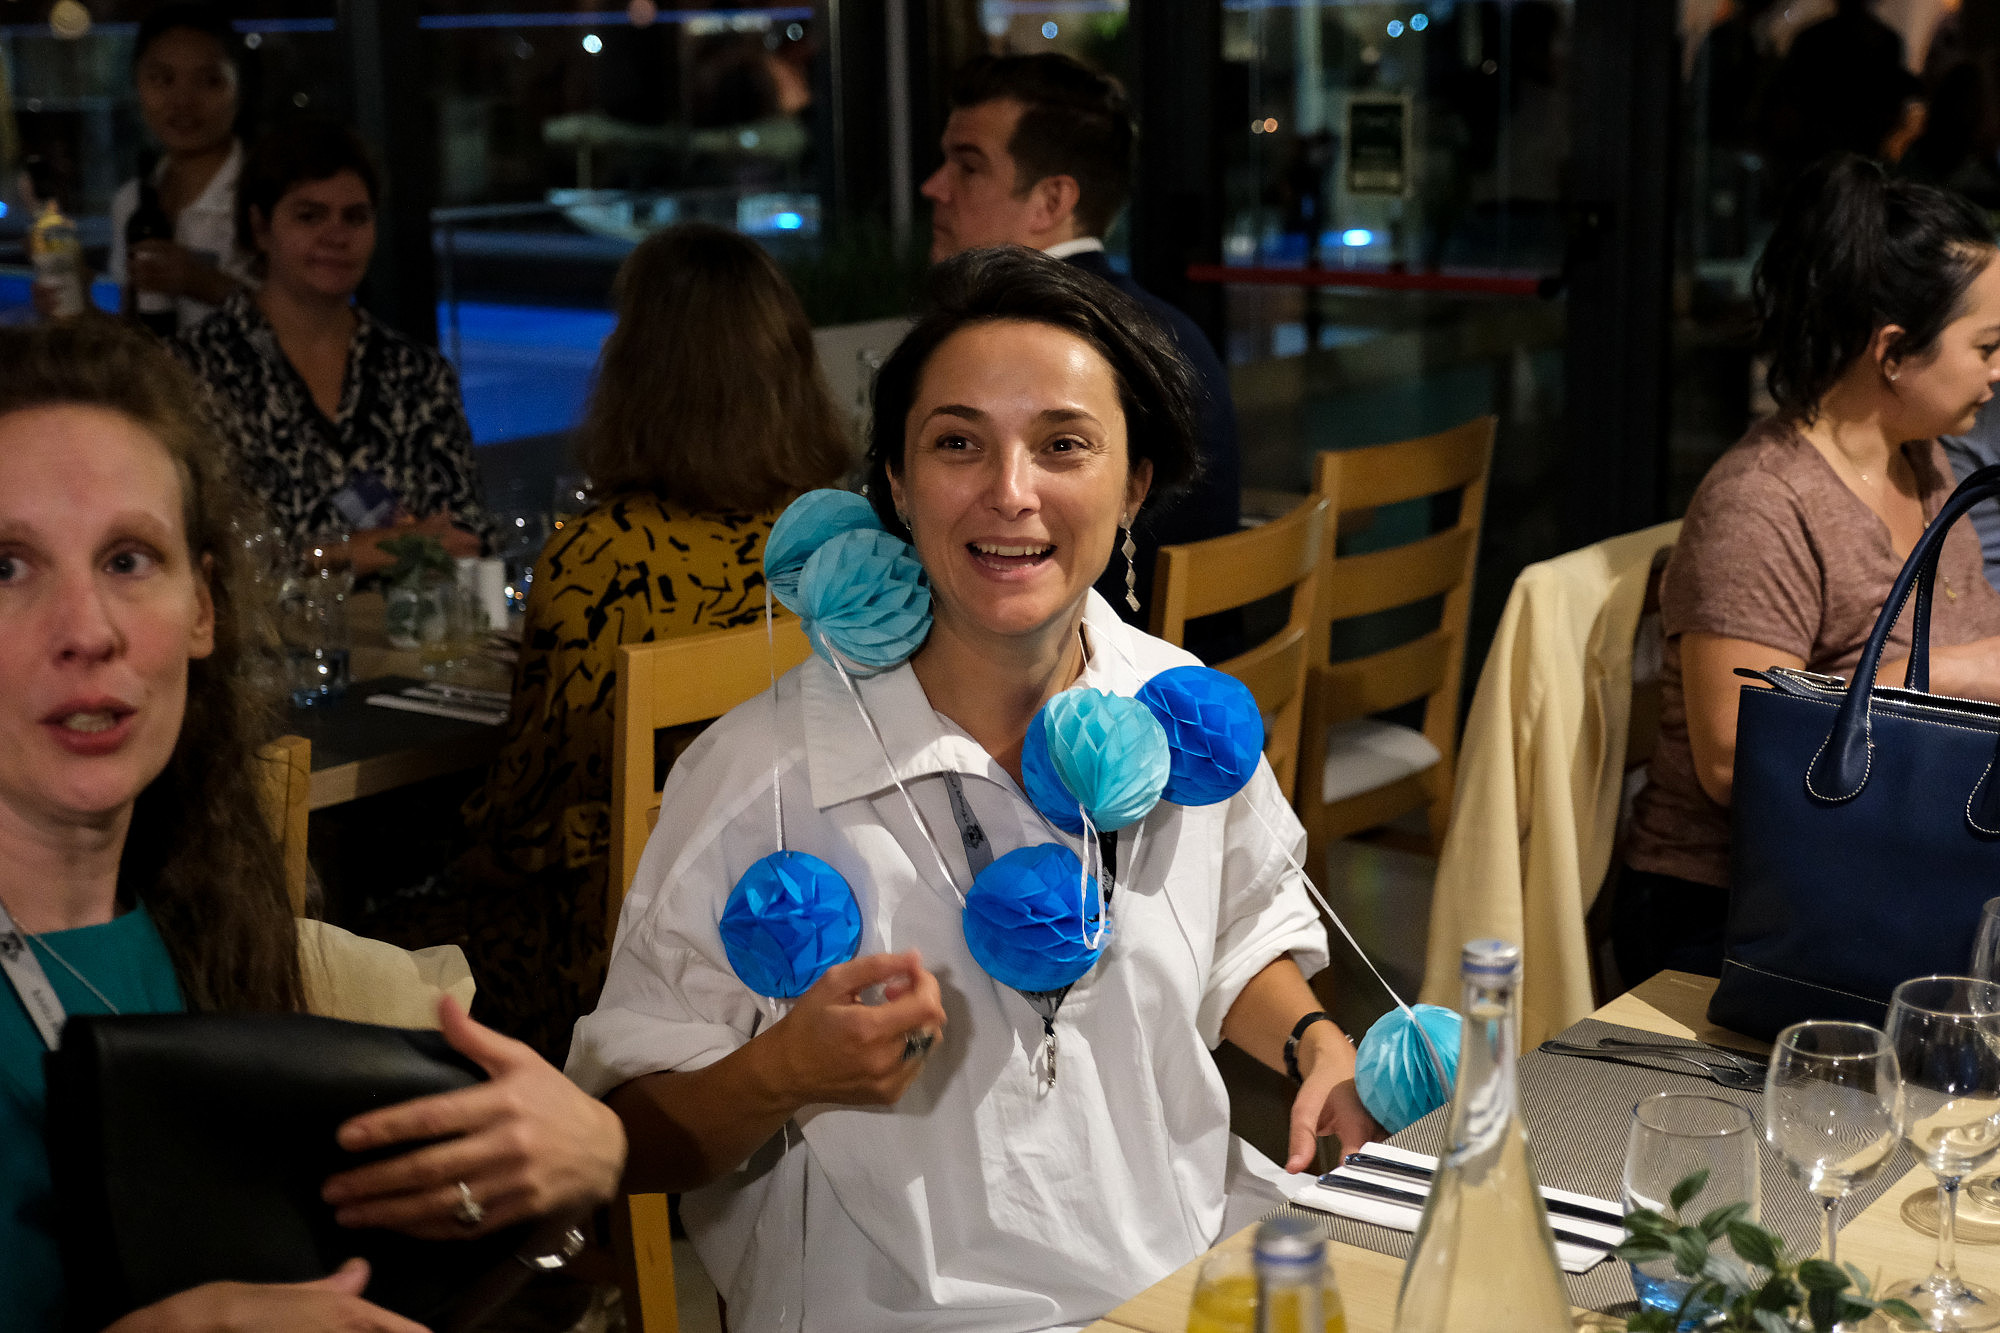 People are sitting on a restaurant table. One of them has a blue garland around their neck and is smiling.  © Image: Jorge Gomes